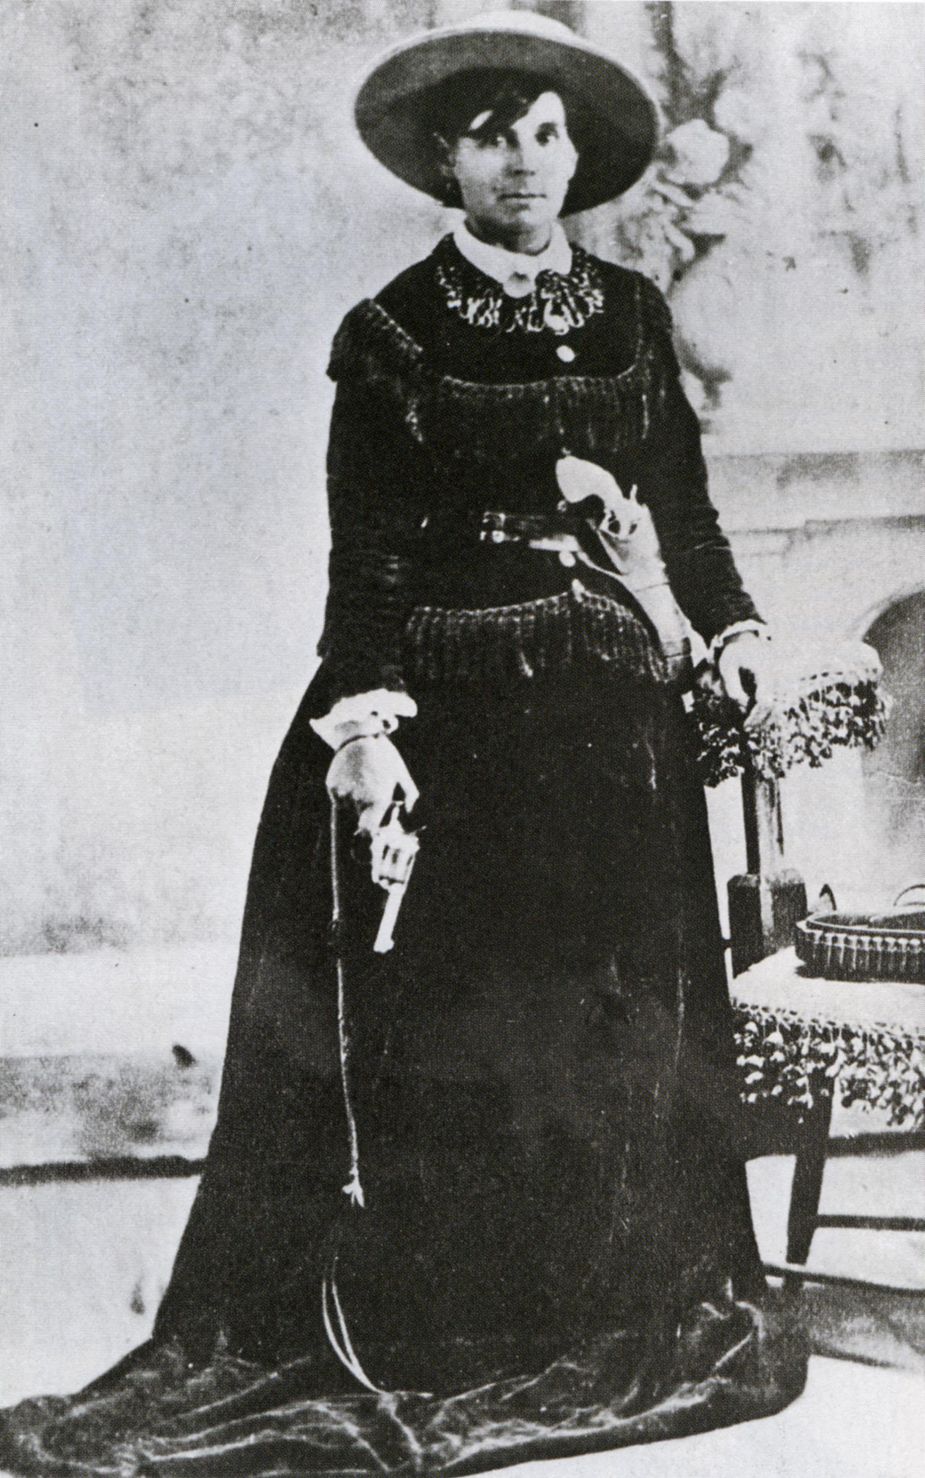 Famed female outlaw Belle Starr's life was not a simple one. 